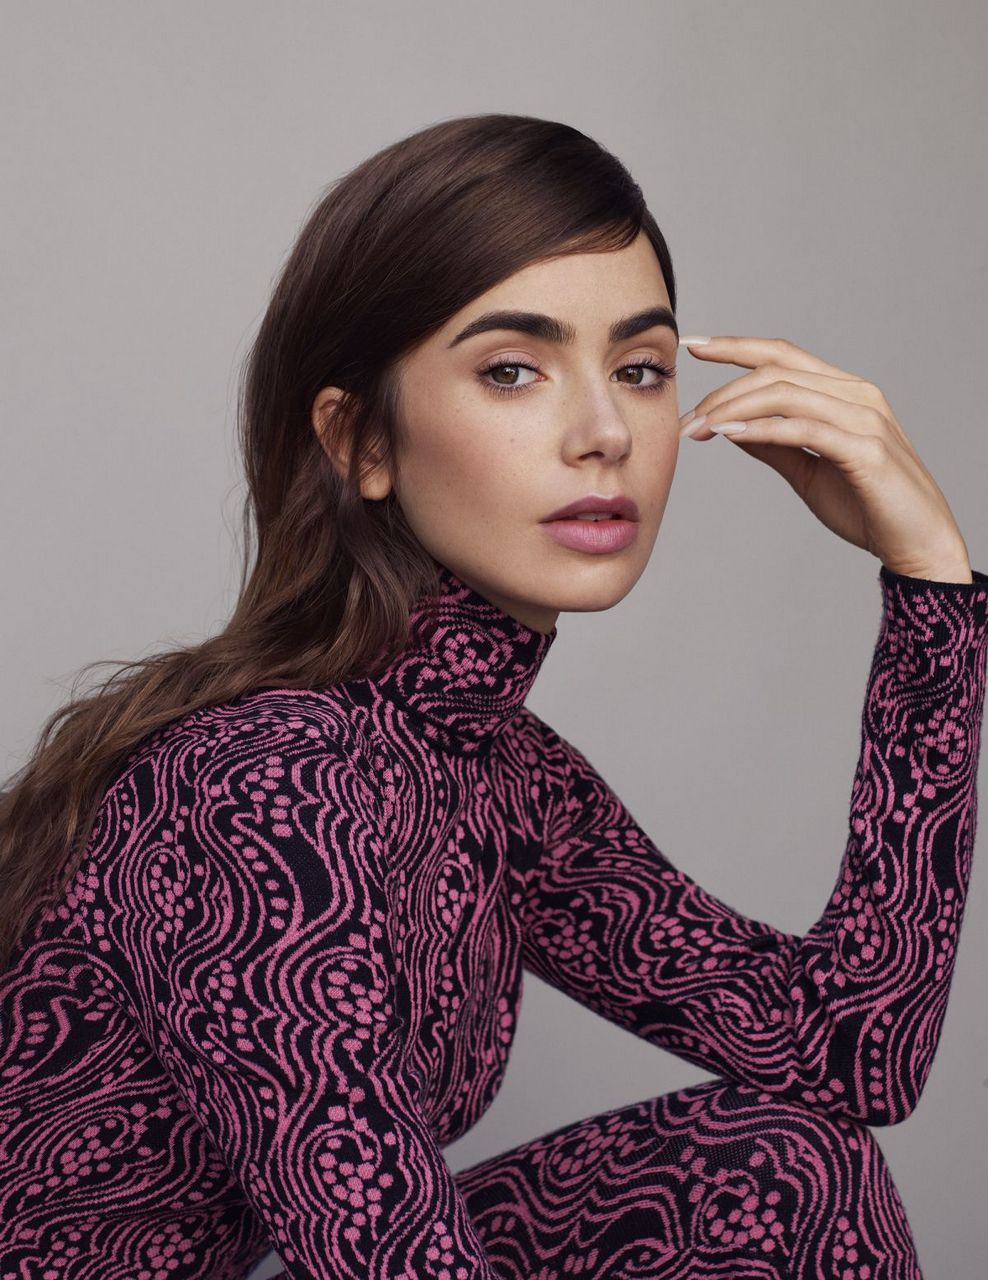 Lily Collins For El Pais January